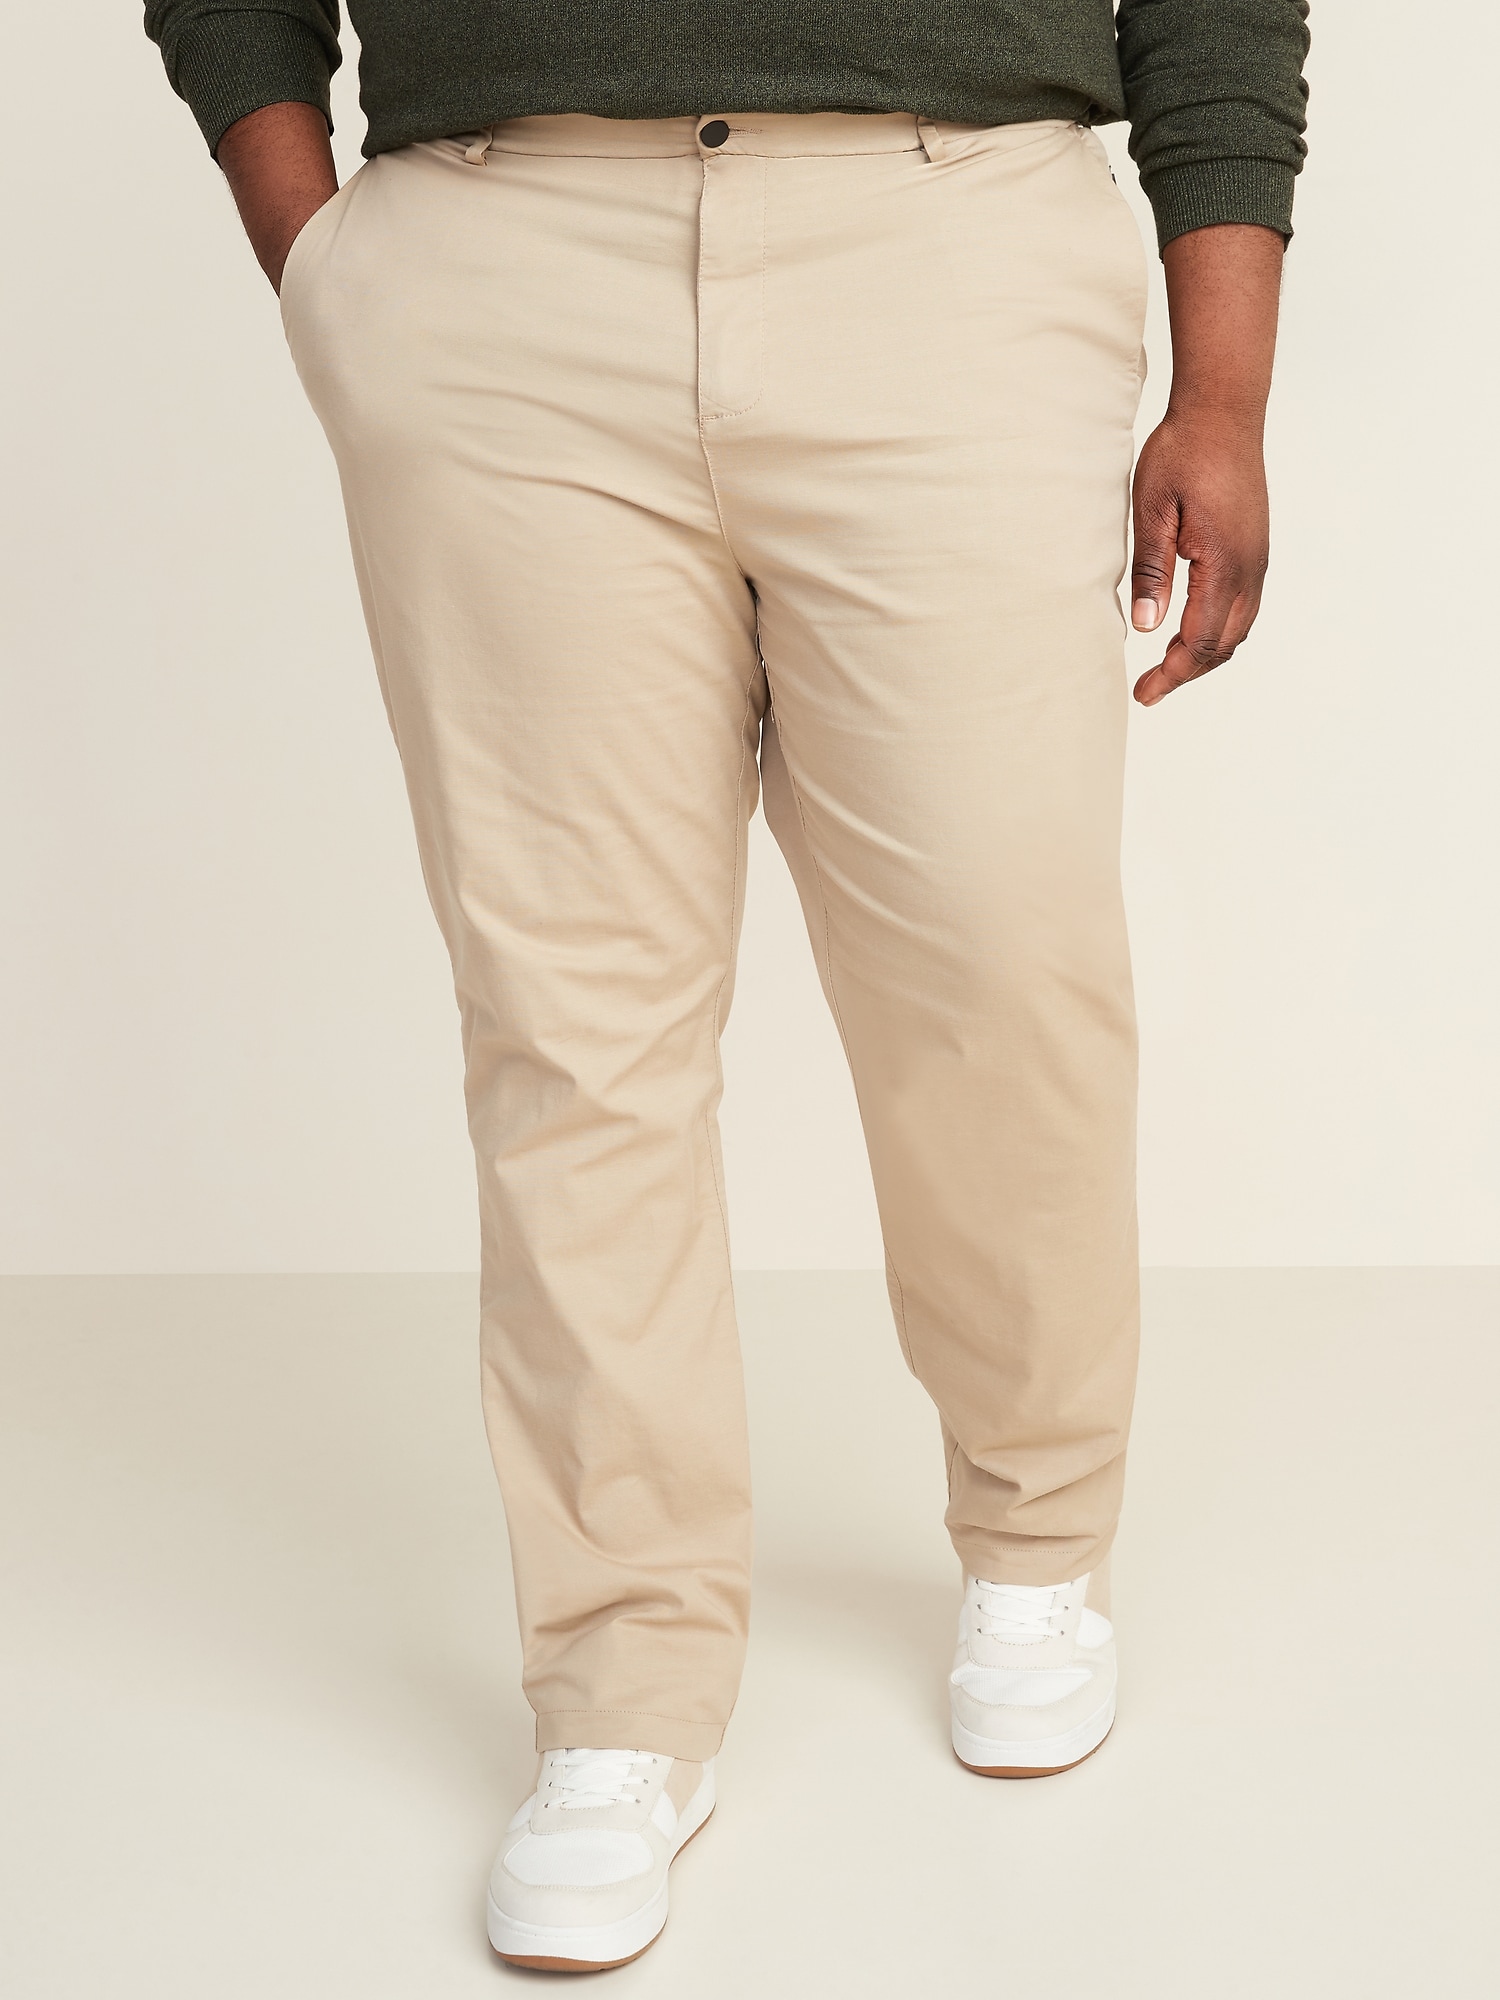 Athletic Ultimate BuiltIn Flex Chino Pants for Men  Old Navy